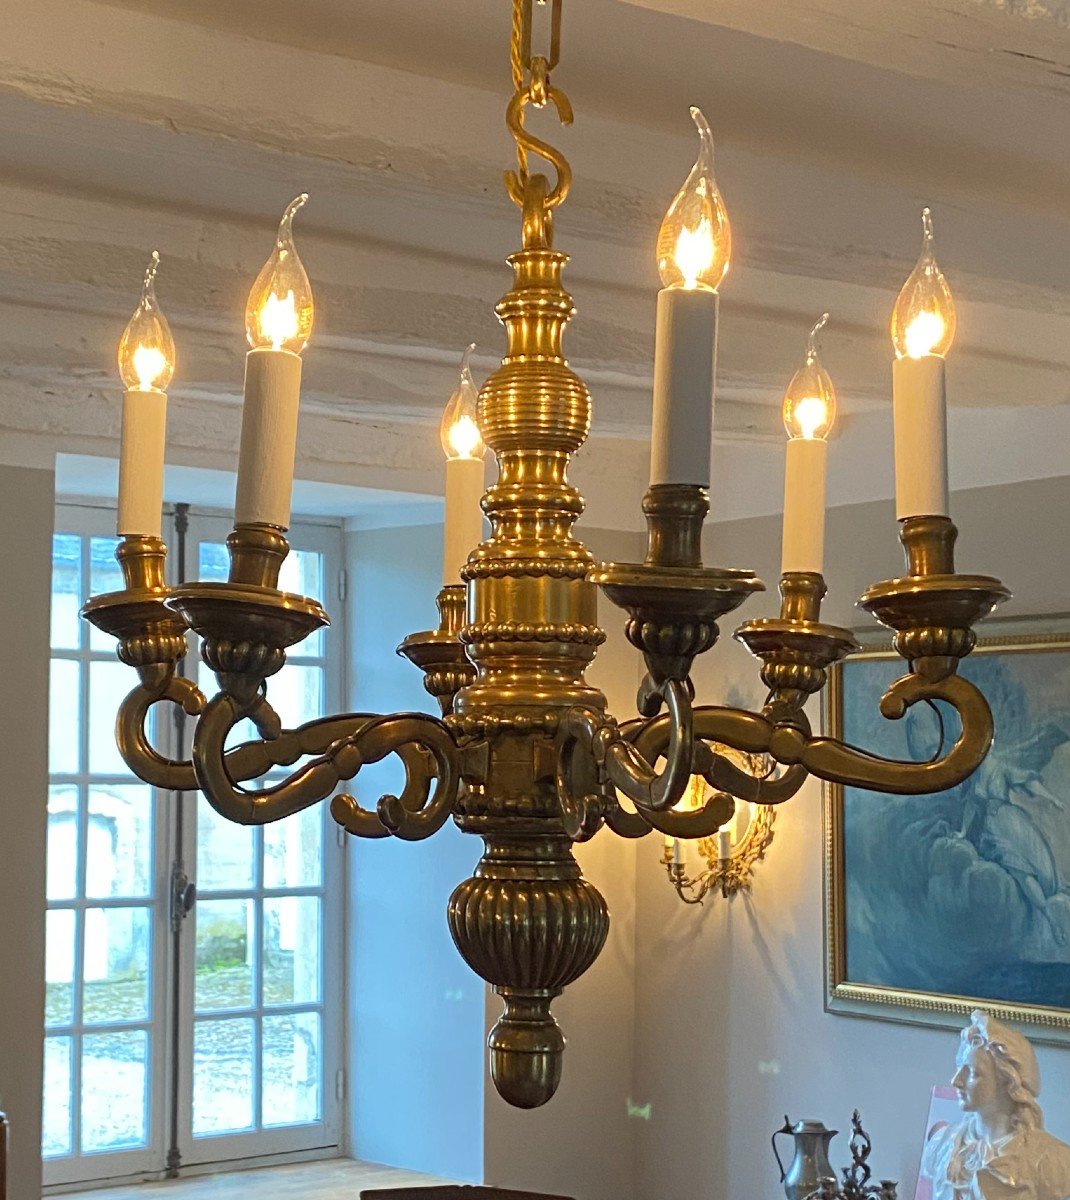 Bronze Chandelier With 6 Arms Of Light-photo-4